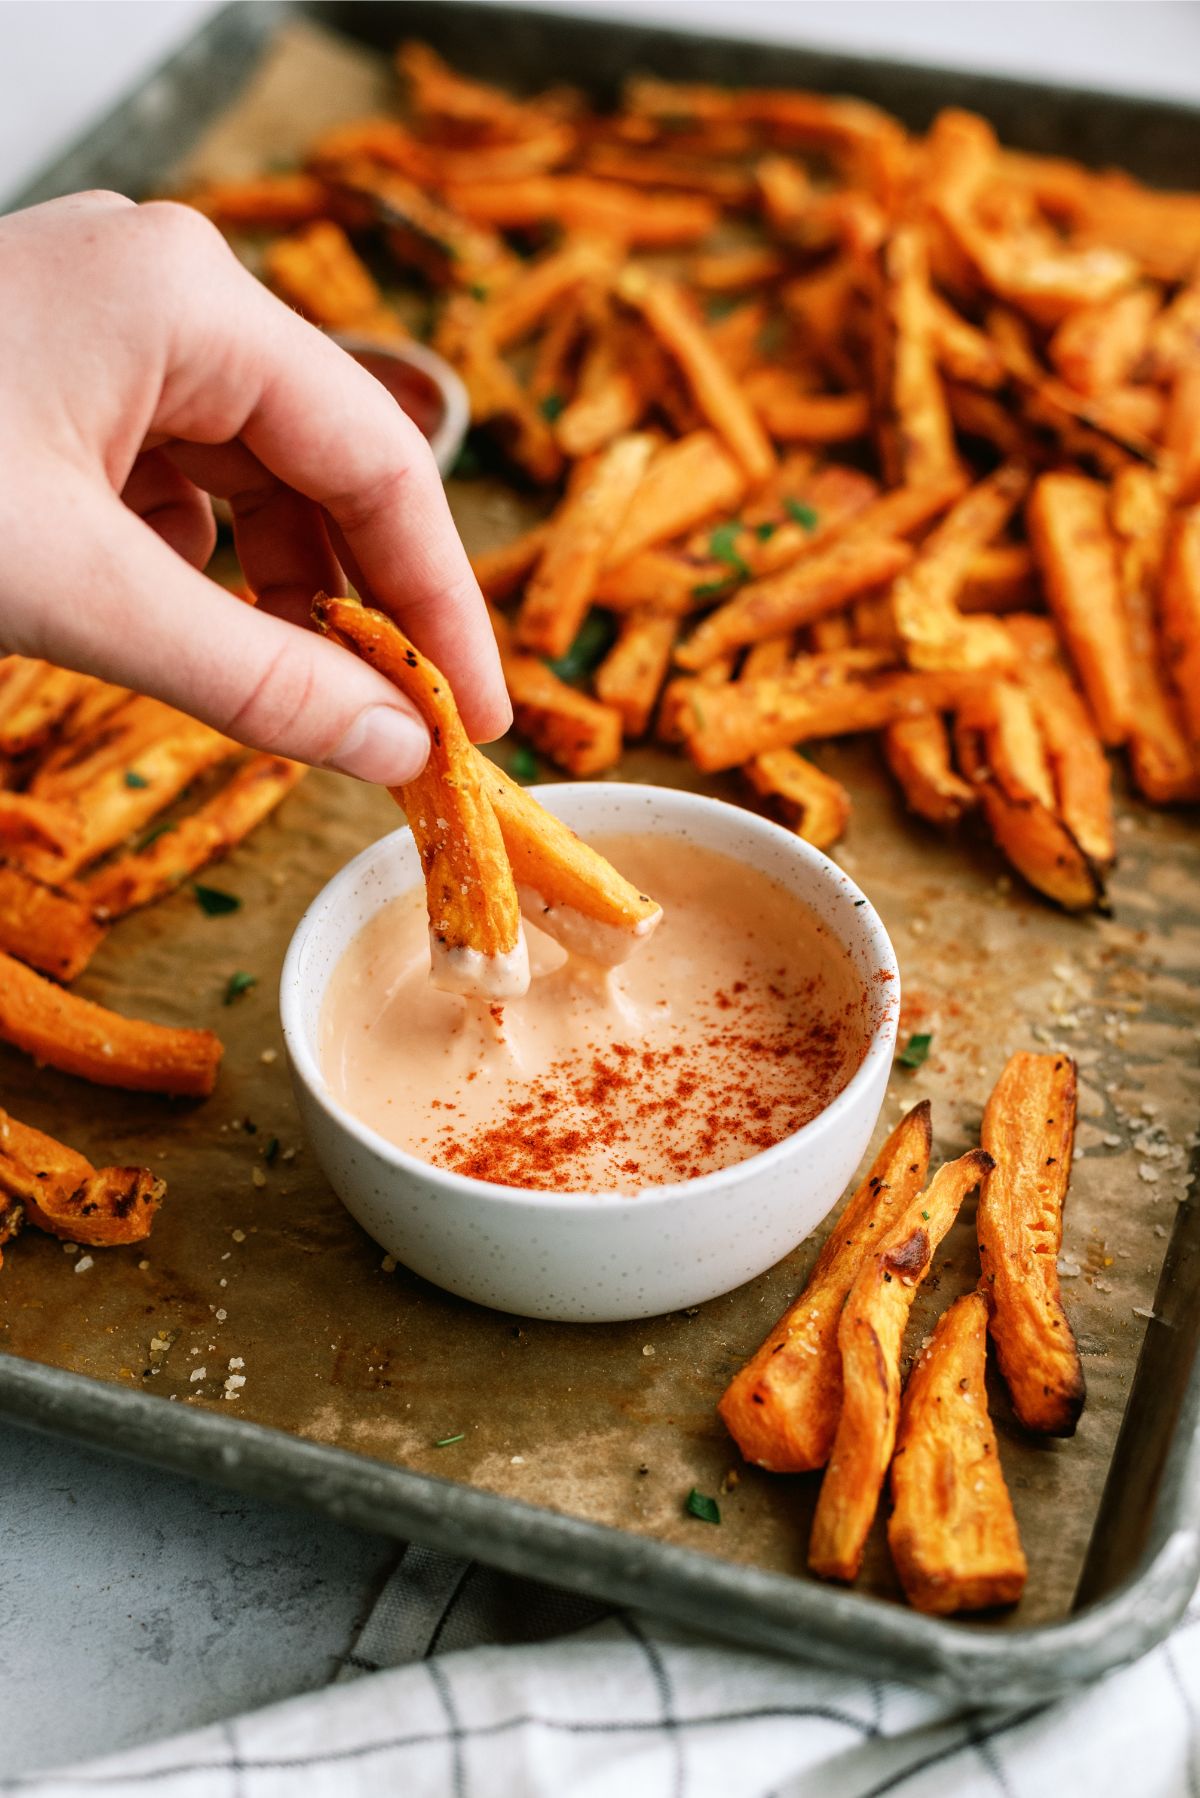 Dipping Baked Sweet Potato Fries in fry sauce with a pan of Baked Sweet Potato Fries in the background